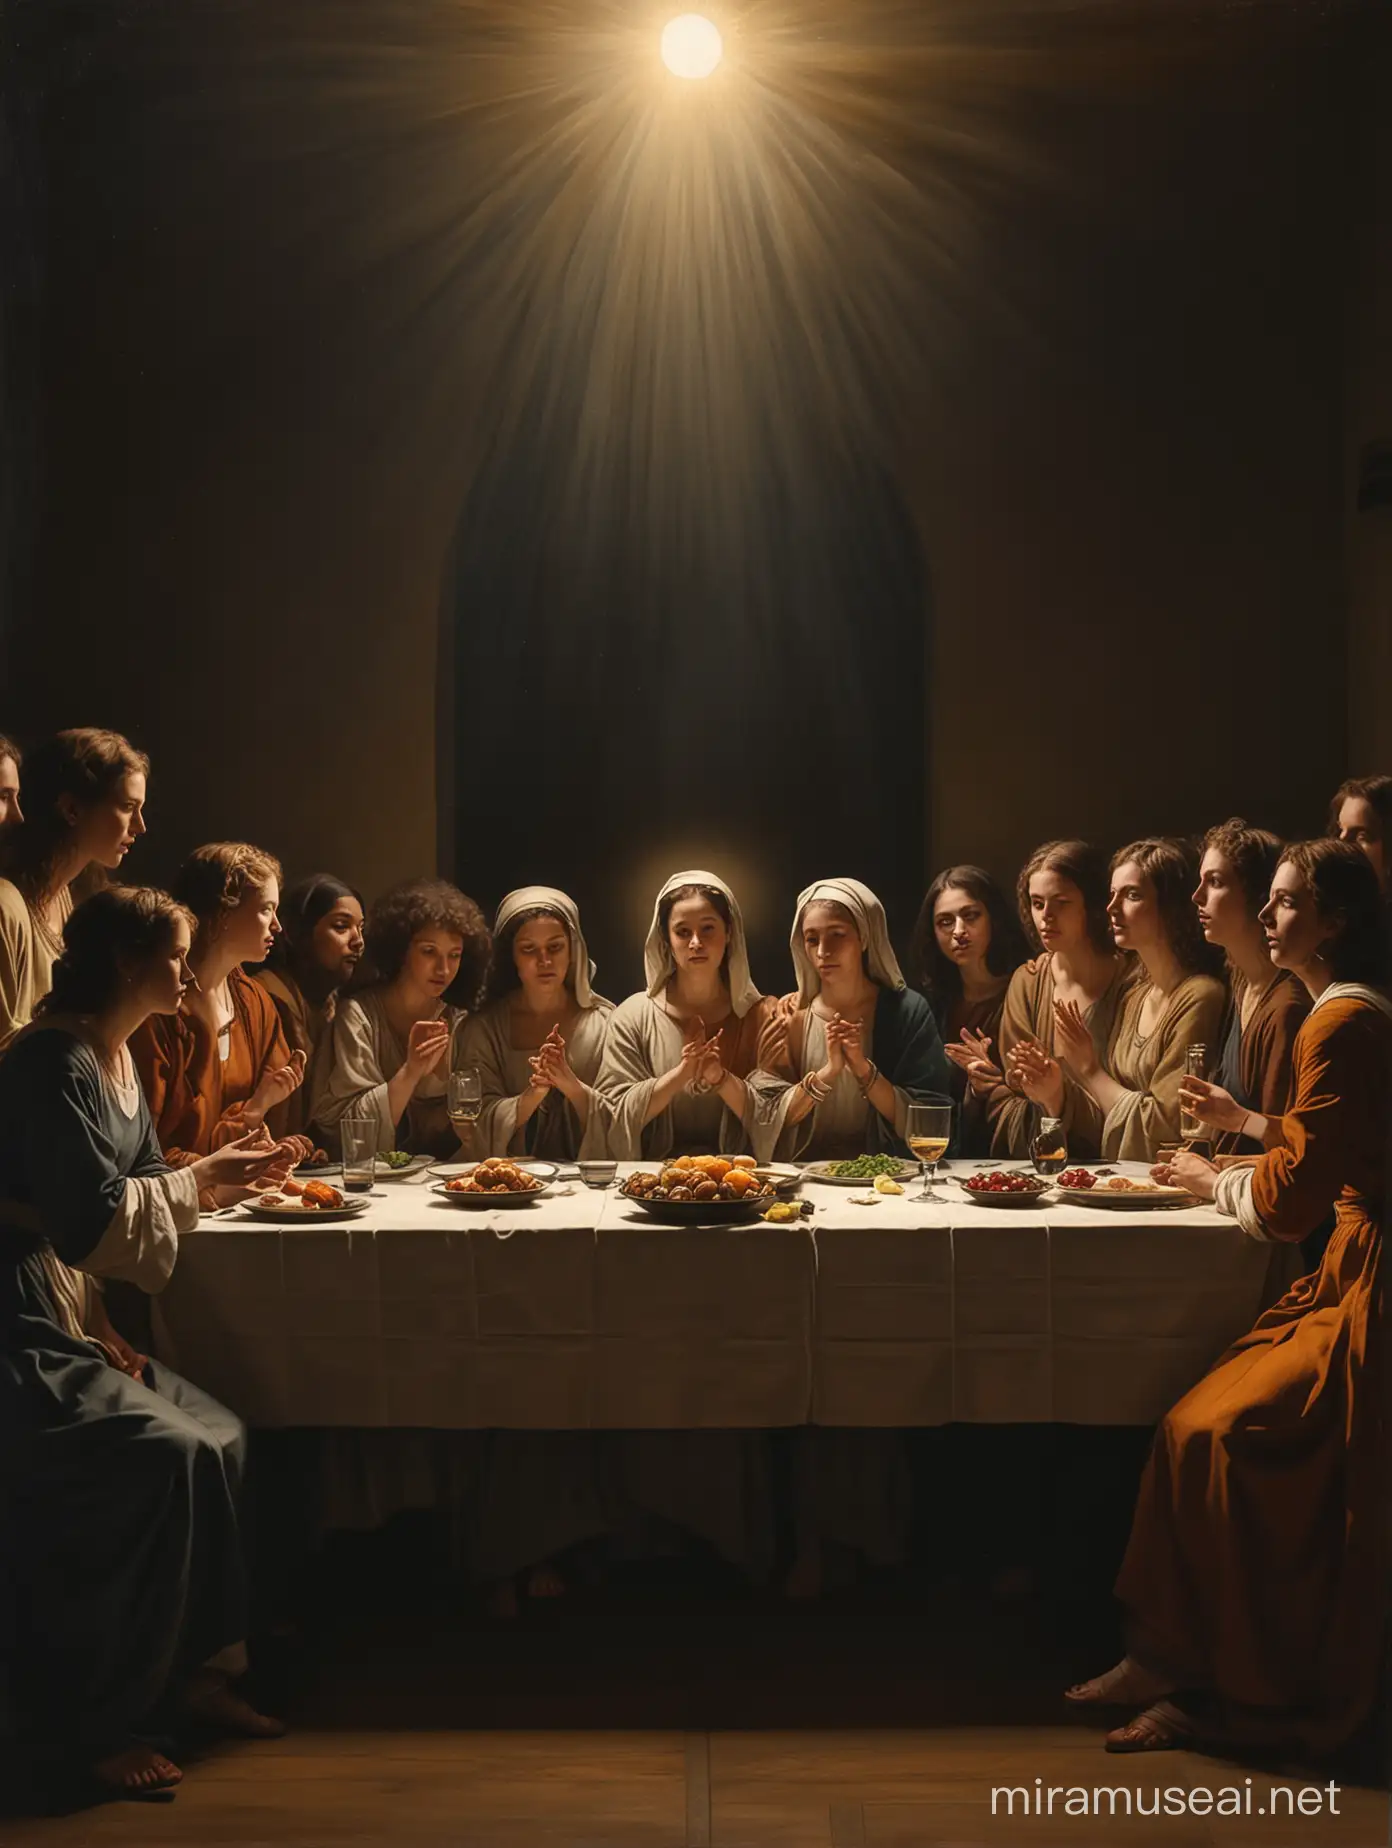 painting that will show  the last supper with the twelve female apostles in a Rembrandt style, Dramatic use of light and shadow, a technique known as chiaroscuro, This creates a striking contrast between light and dark areas, often highlighting the focal point of the painting, His compositions often convey deep emotional or narrative intensity, Rembrandt's color palette is typically rich but subdued, featuring earthy tones and warm colors, His brushwork is renowned for its expressiveness and texture, ranging from smooth and finely detailed in areas of focus to more loose and impressionistic in other parts,